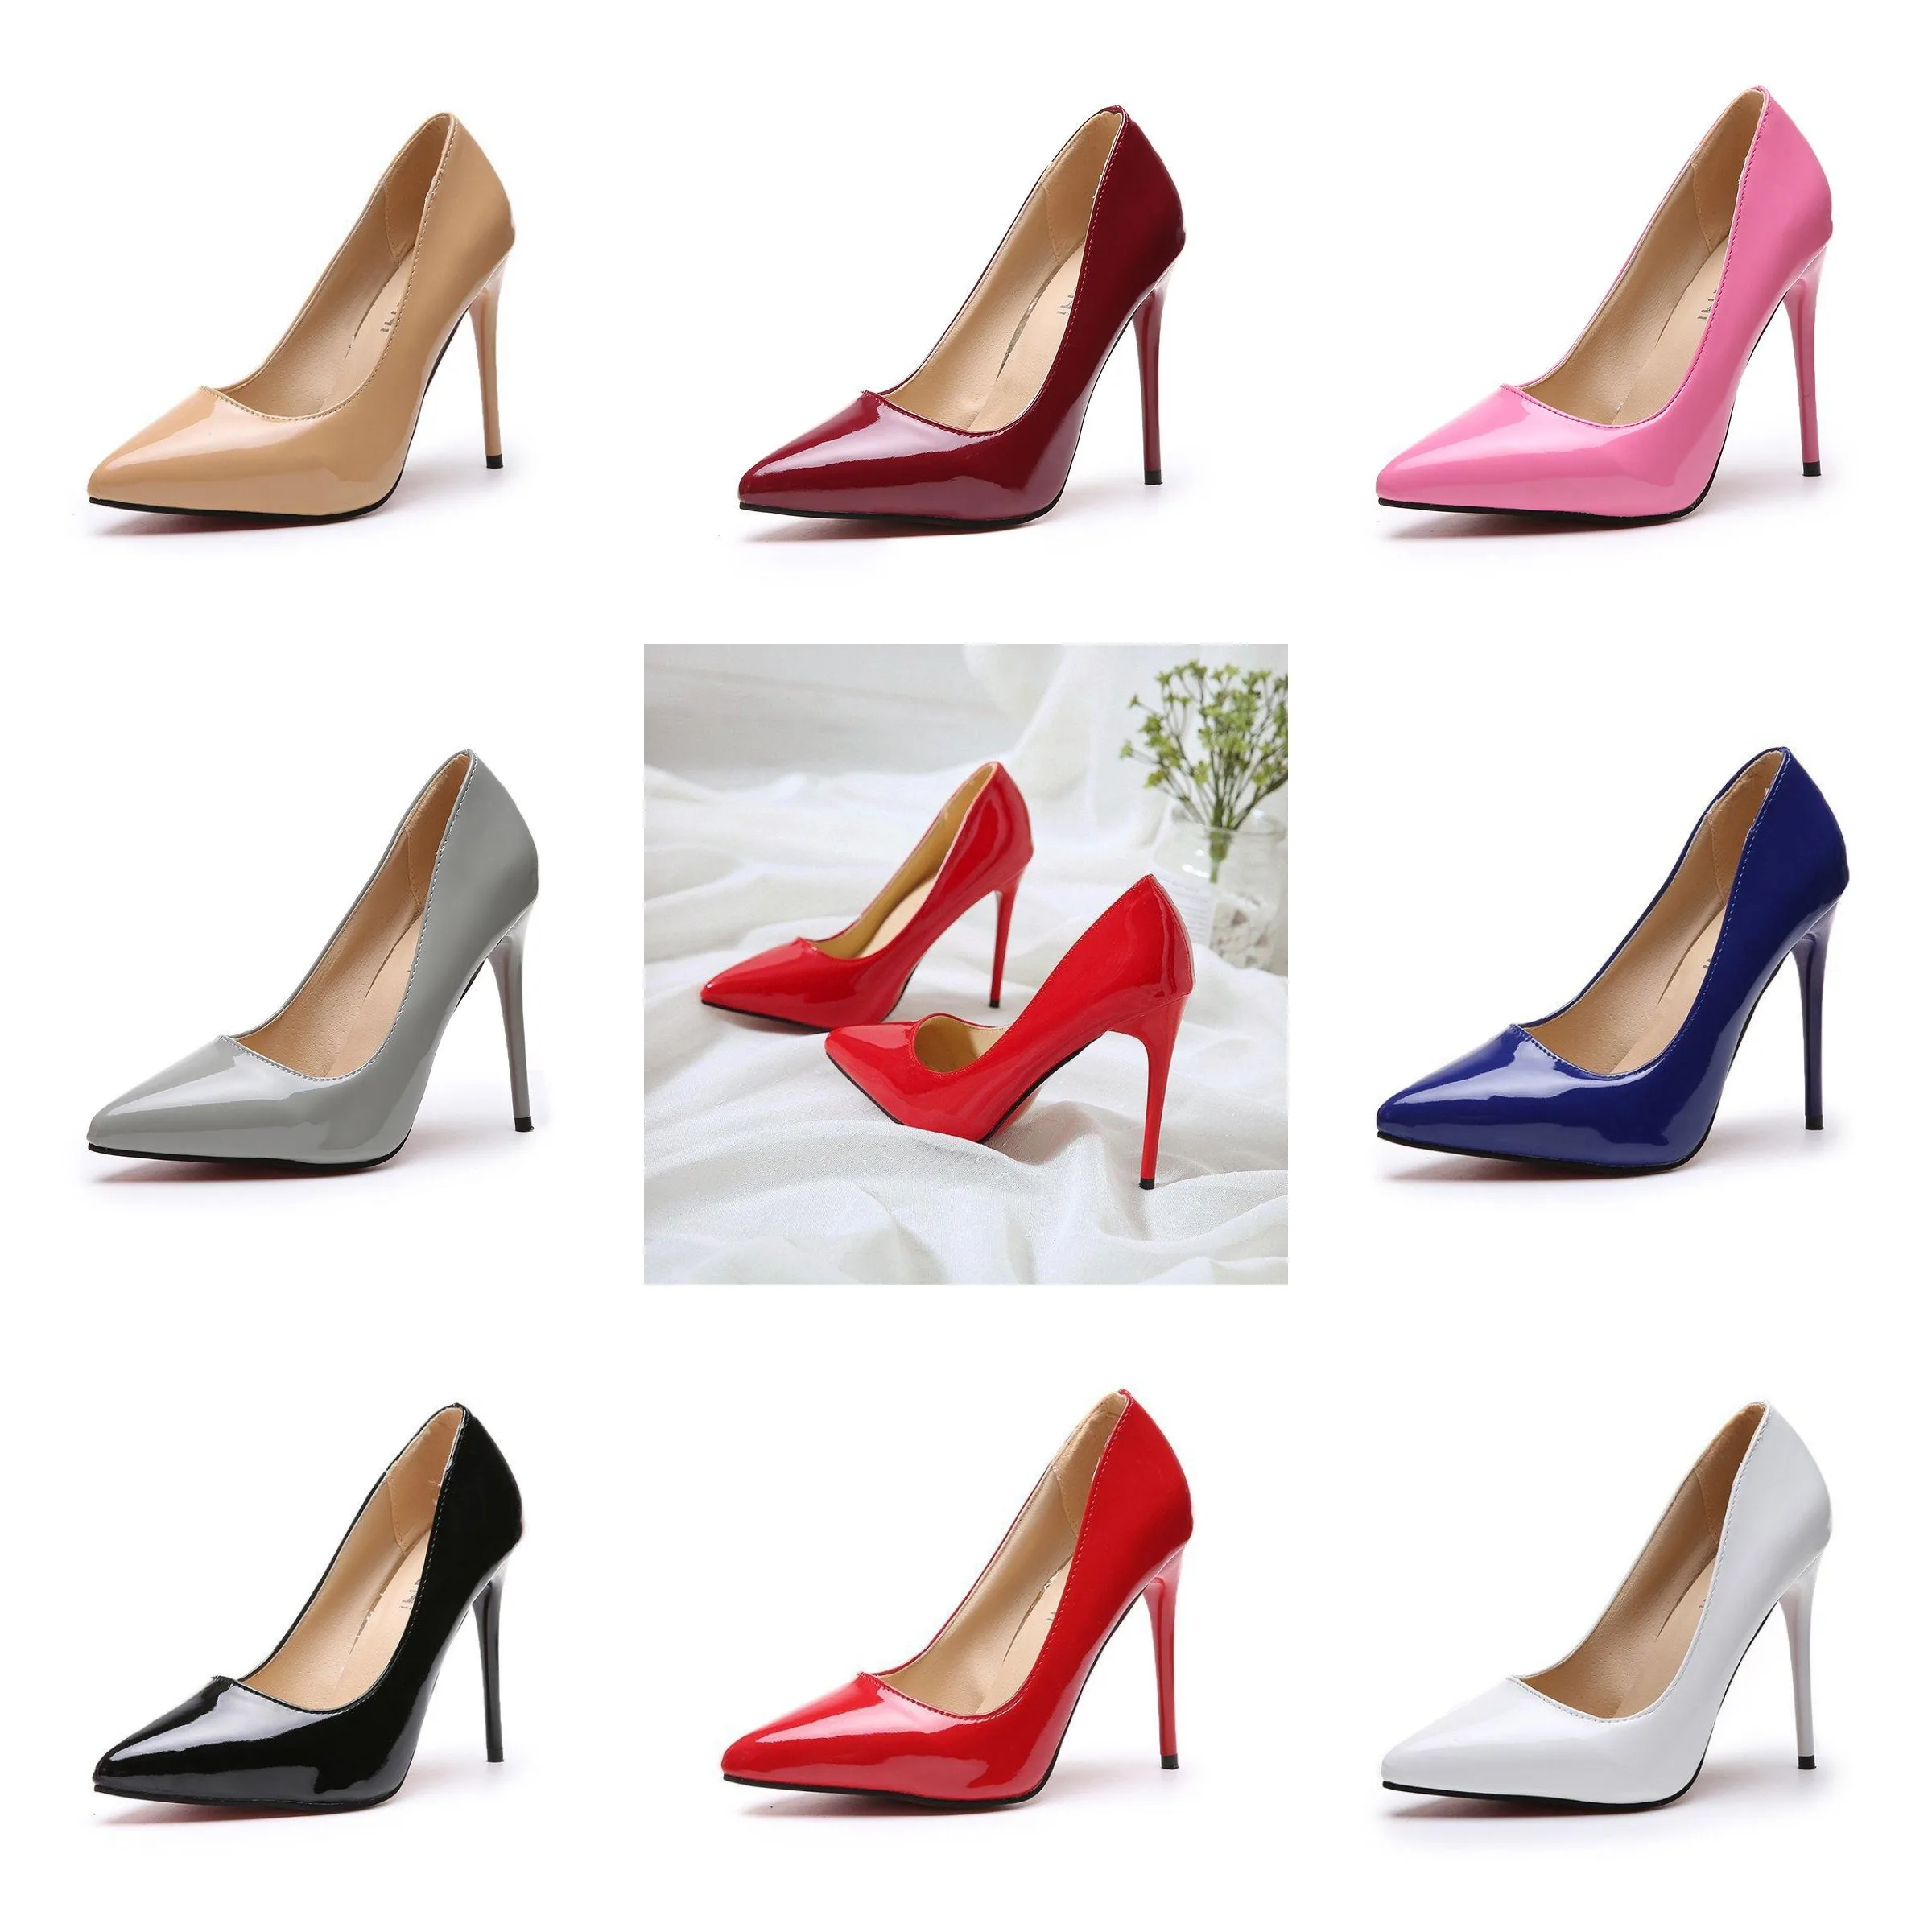 50%OFF Women Shoes Pointed Toe Pumps Patent Leather Dress High Heels Boat Wedding Zapatos Mujer Black Casual Stripper